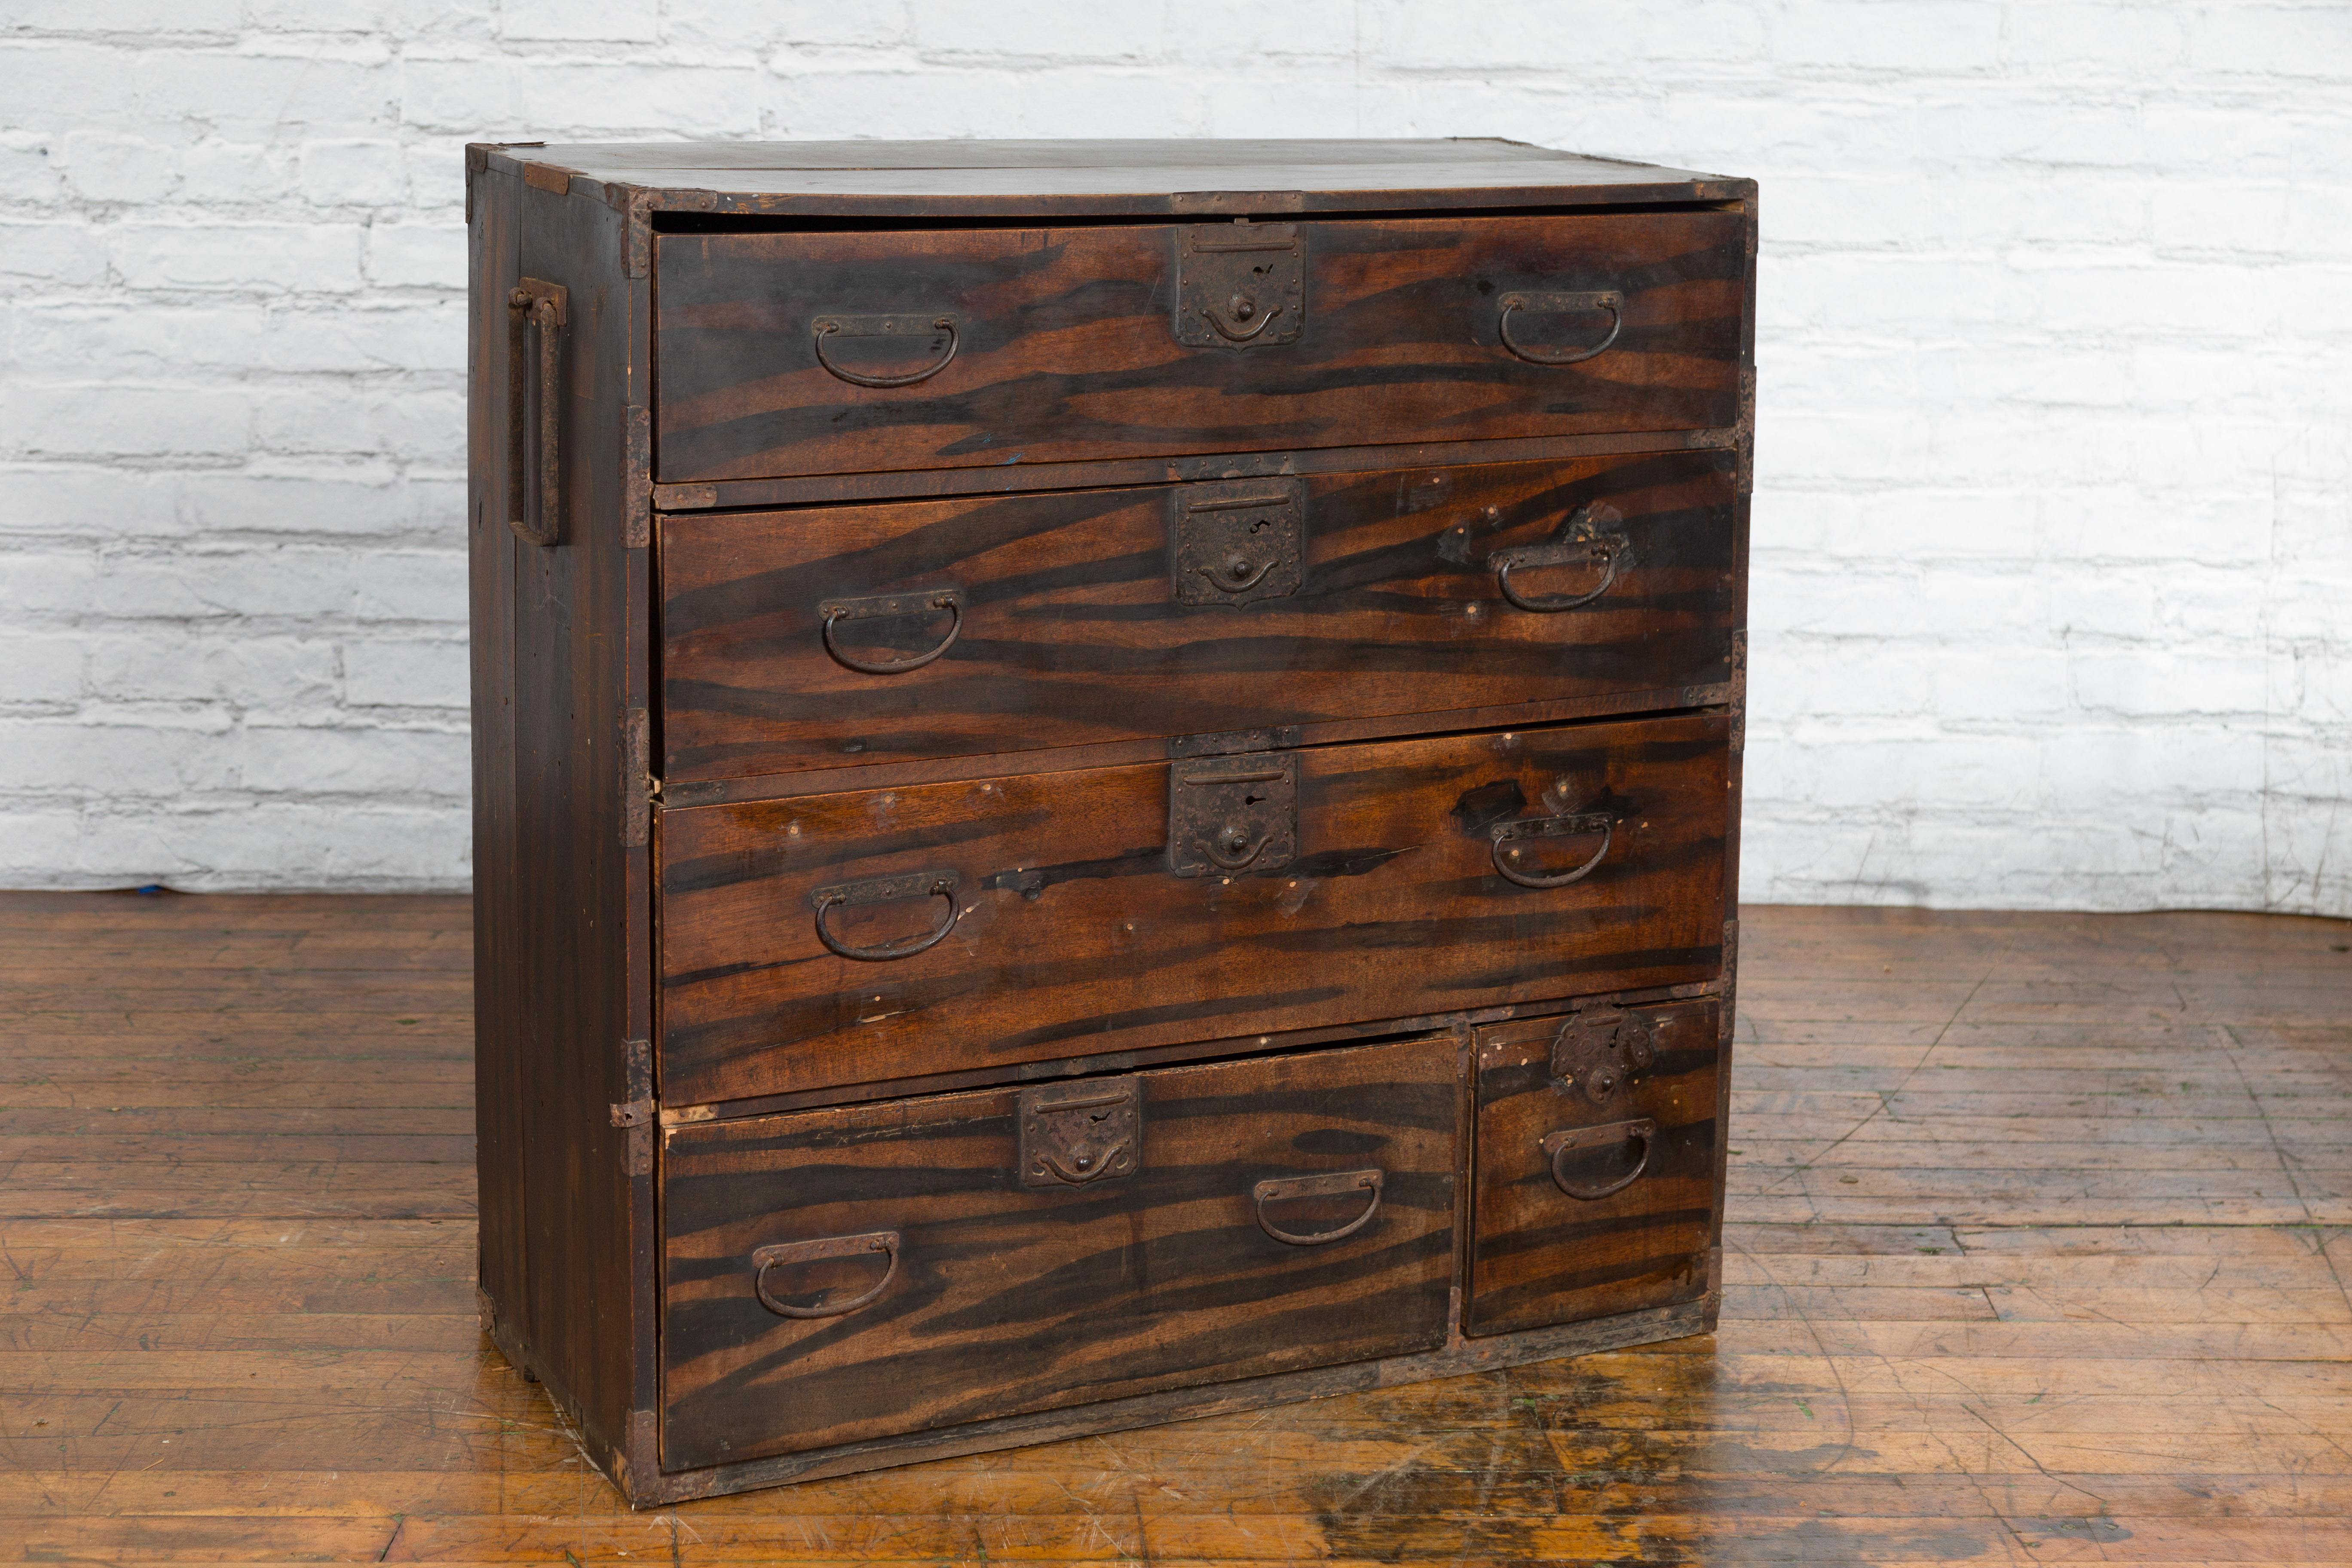 Japanese Meiji Zebra Wood Tansu Chest in Isho-Dansu Style with Five Drawers For Sale 5